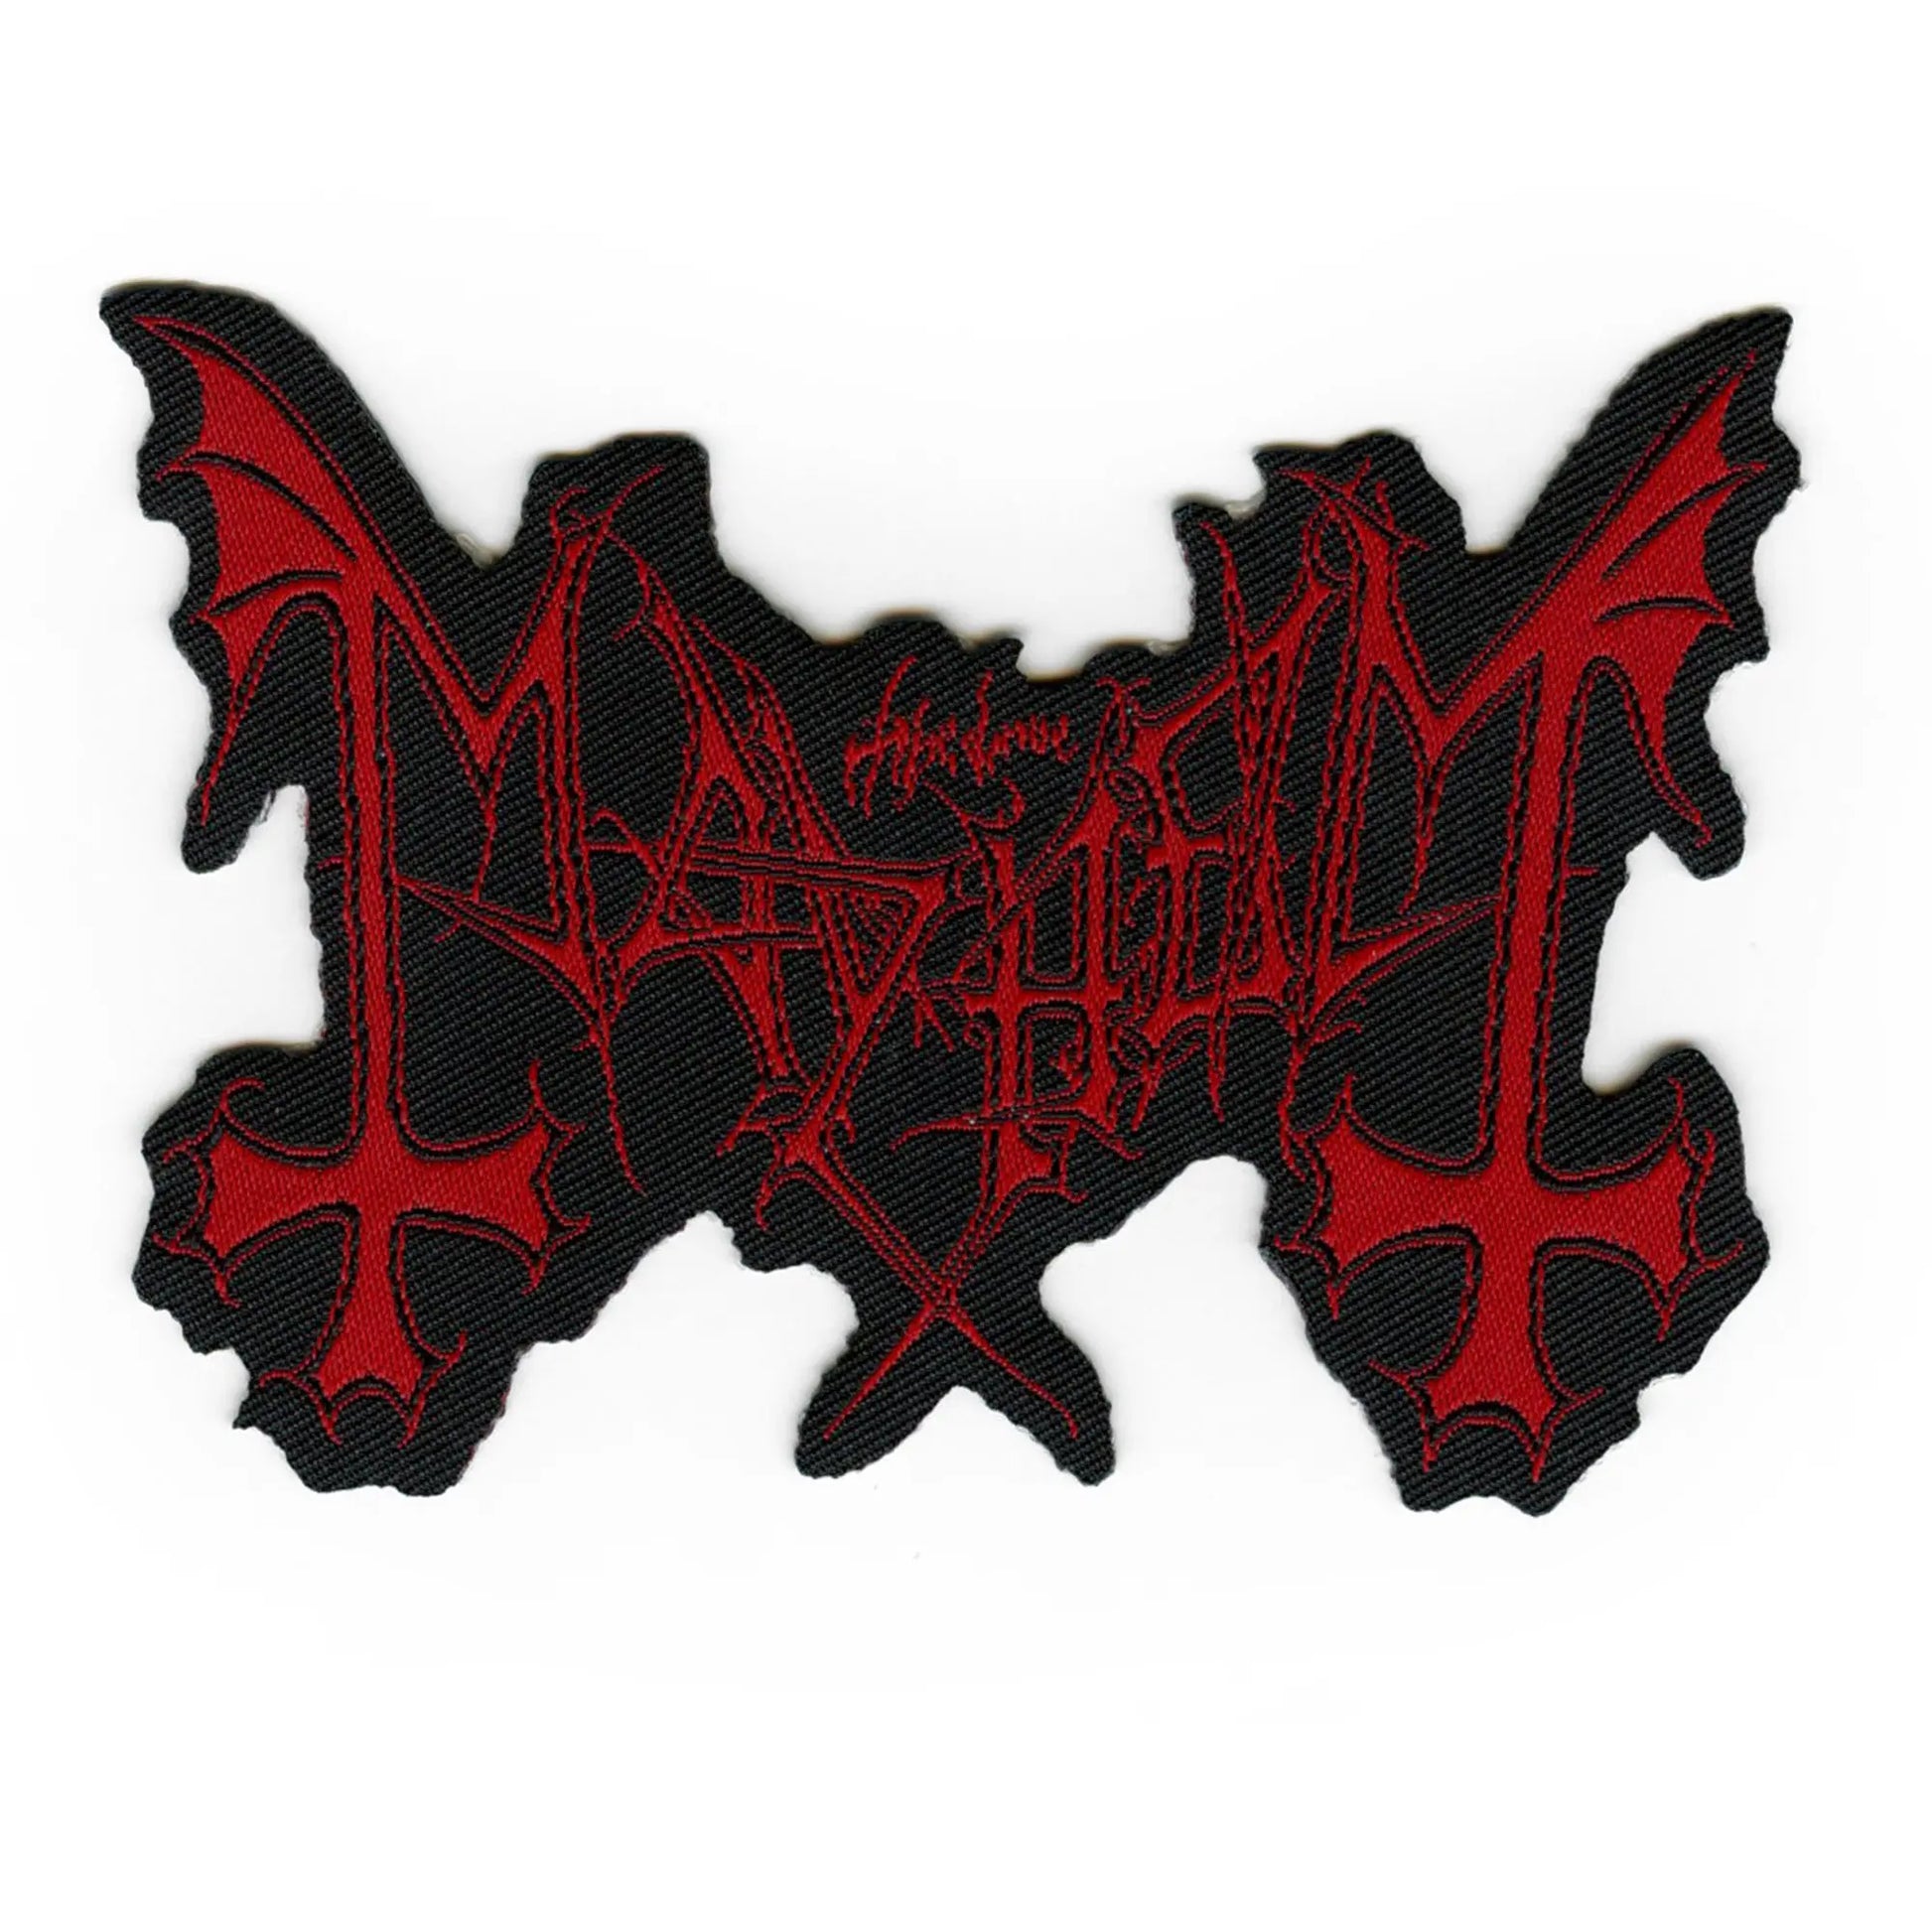 Mayhem Logo Cut Out Patch Black Metal Band Embroidered Iron On